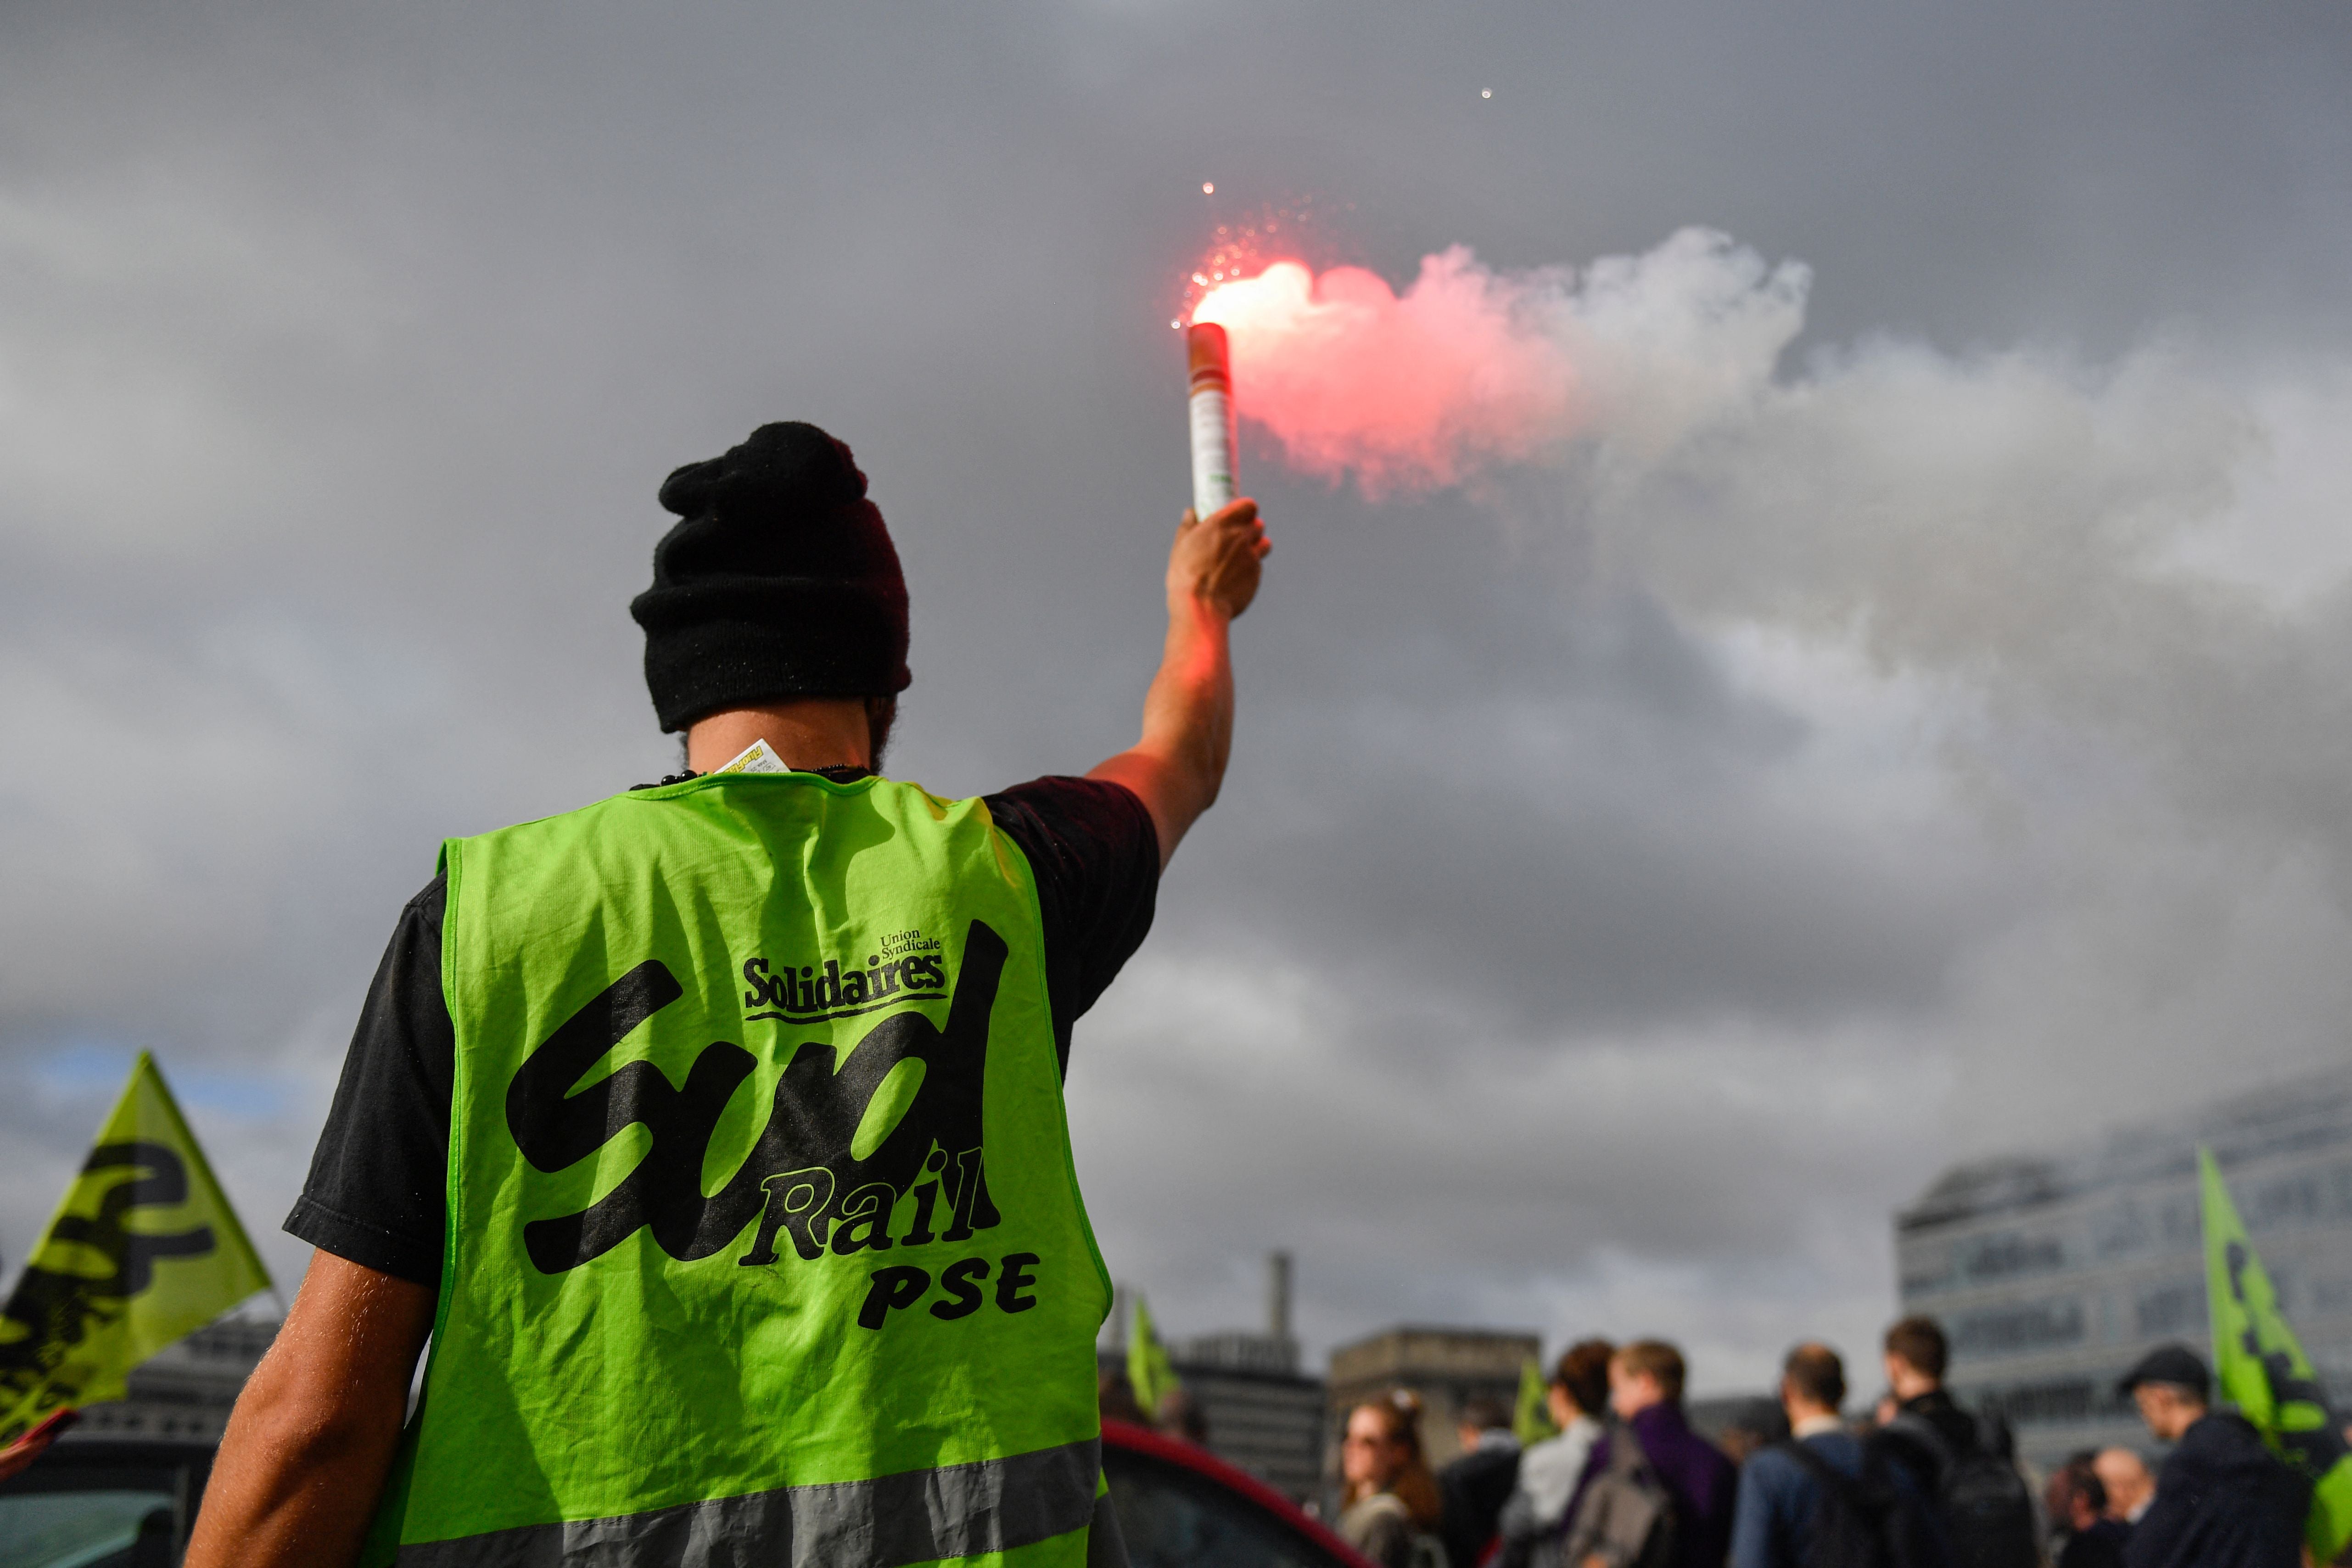 A railway worker lights a flare as he attends a general assembly of railway workers in Gare de Lyon, in Paris